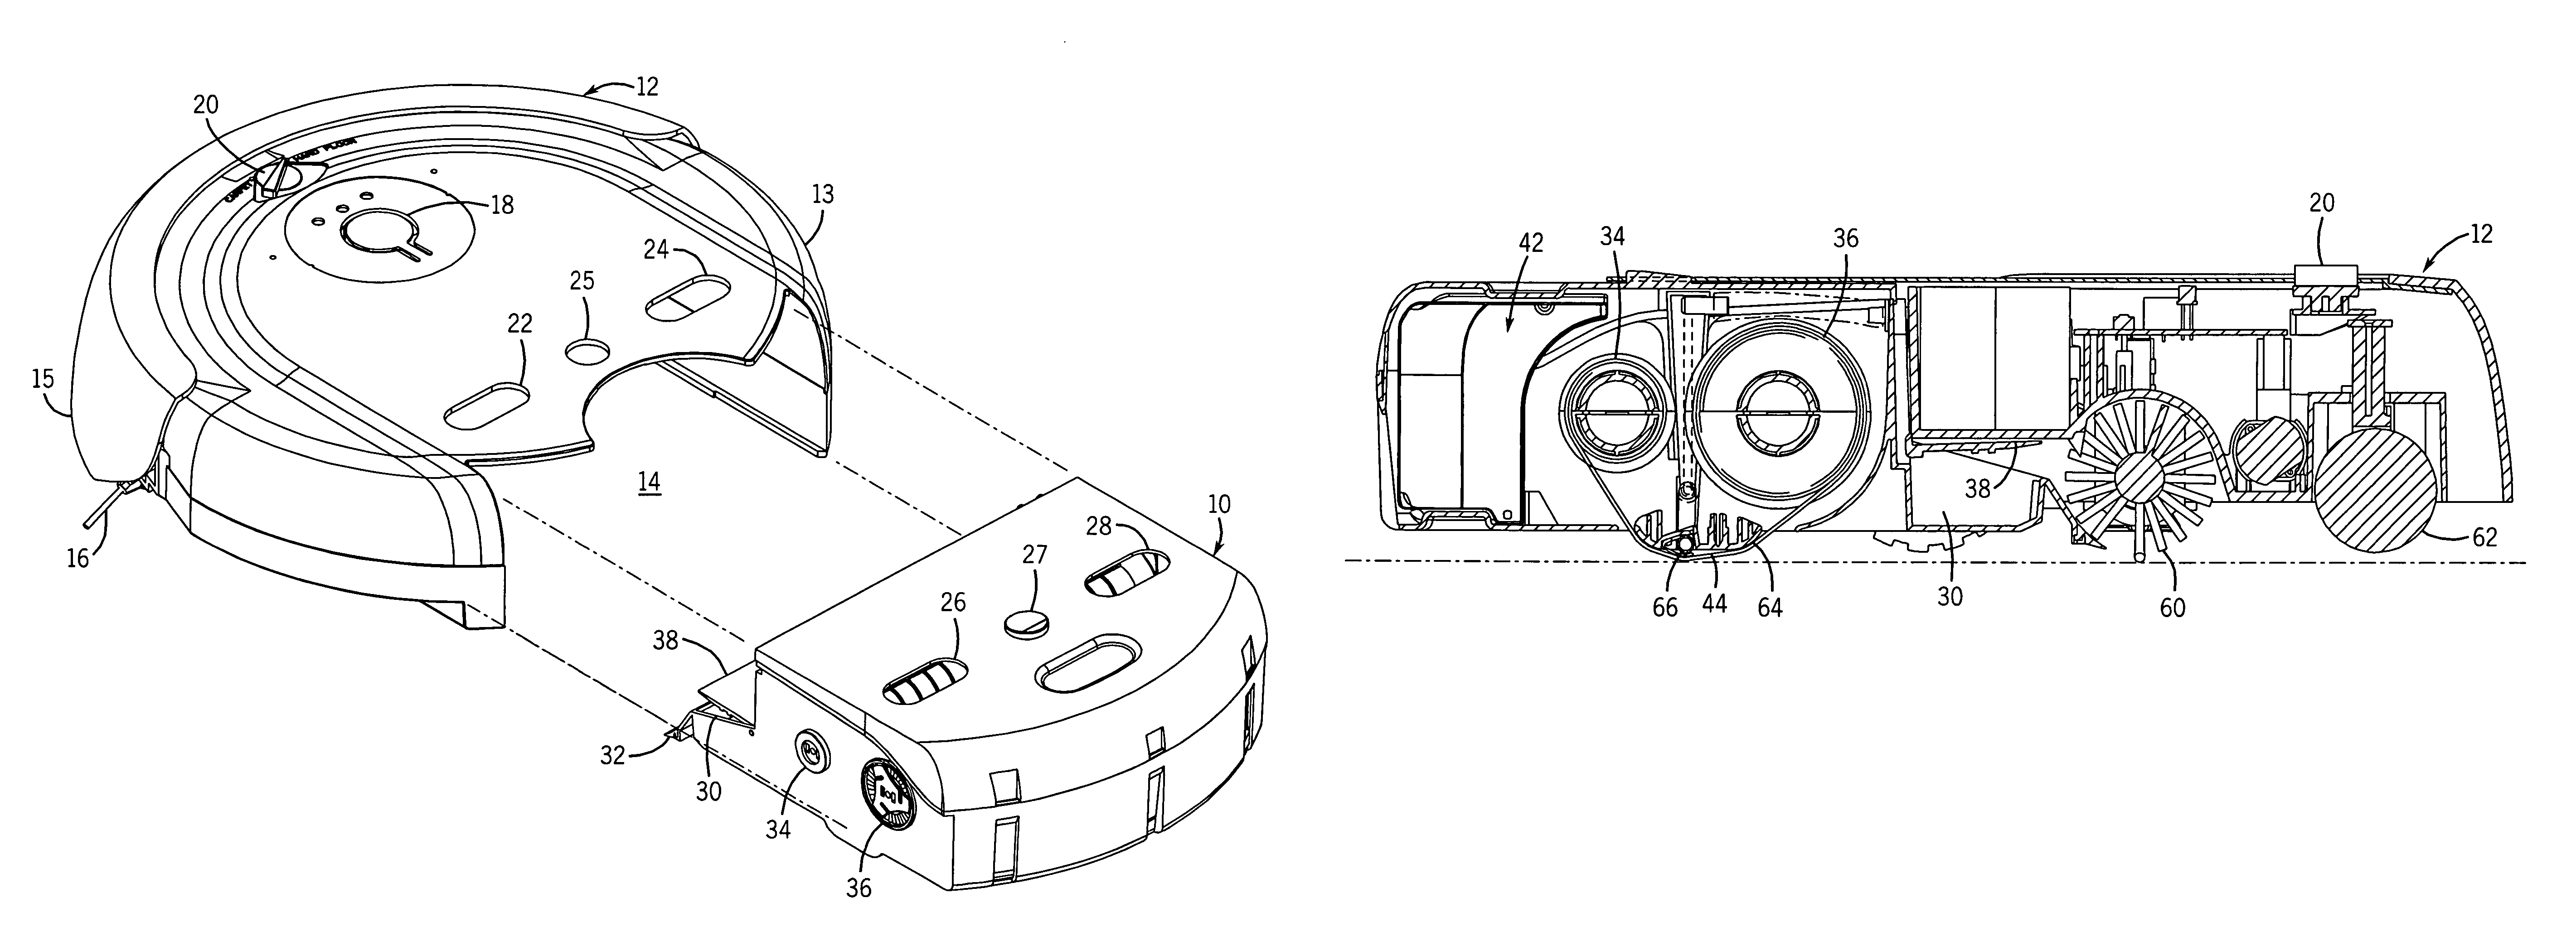 Surface treating device with cartridge-based cleaning system